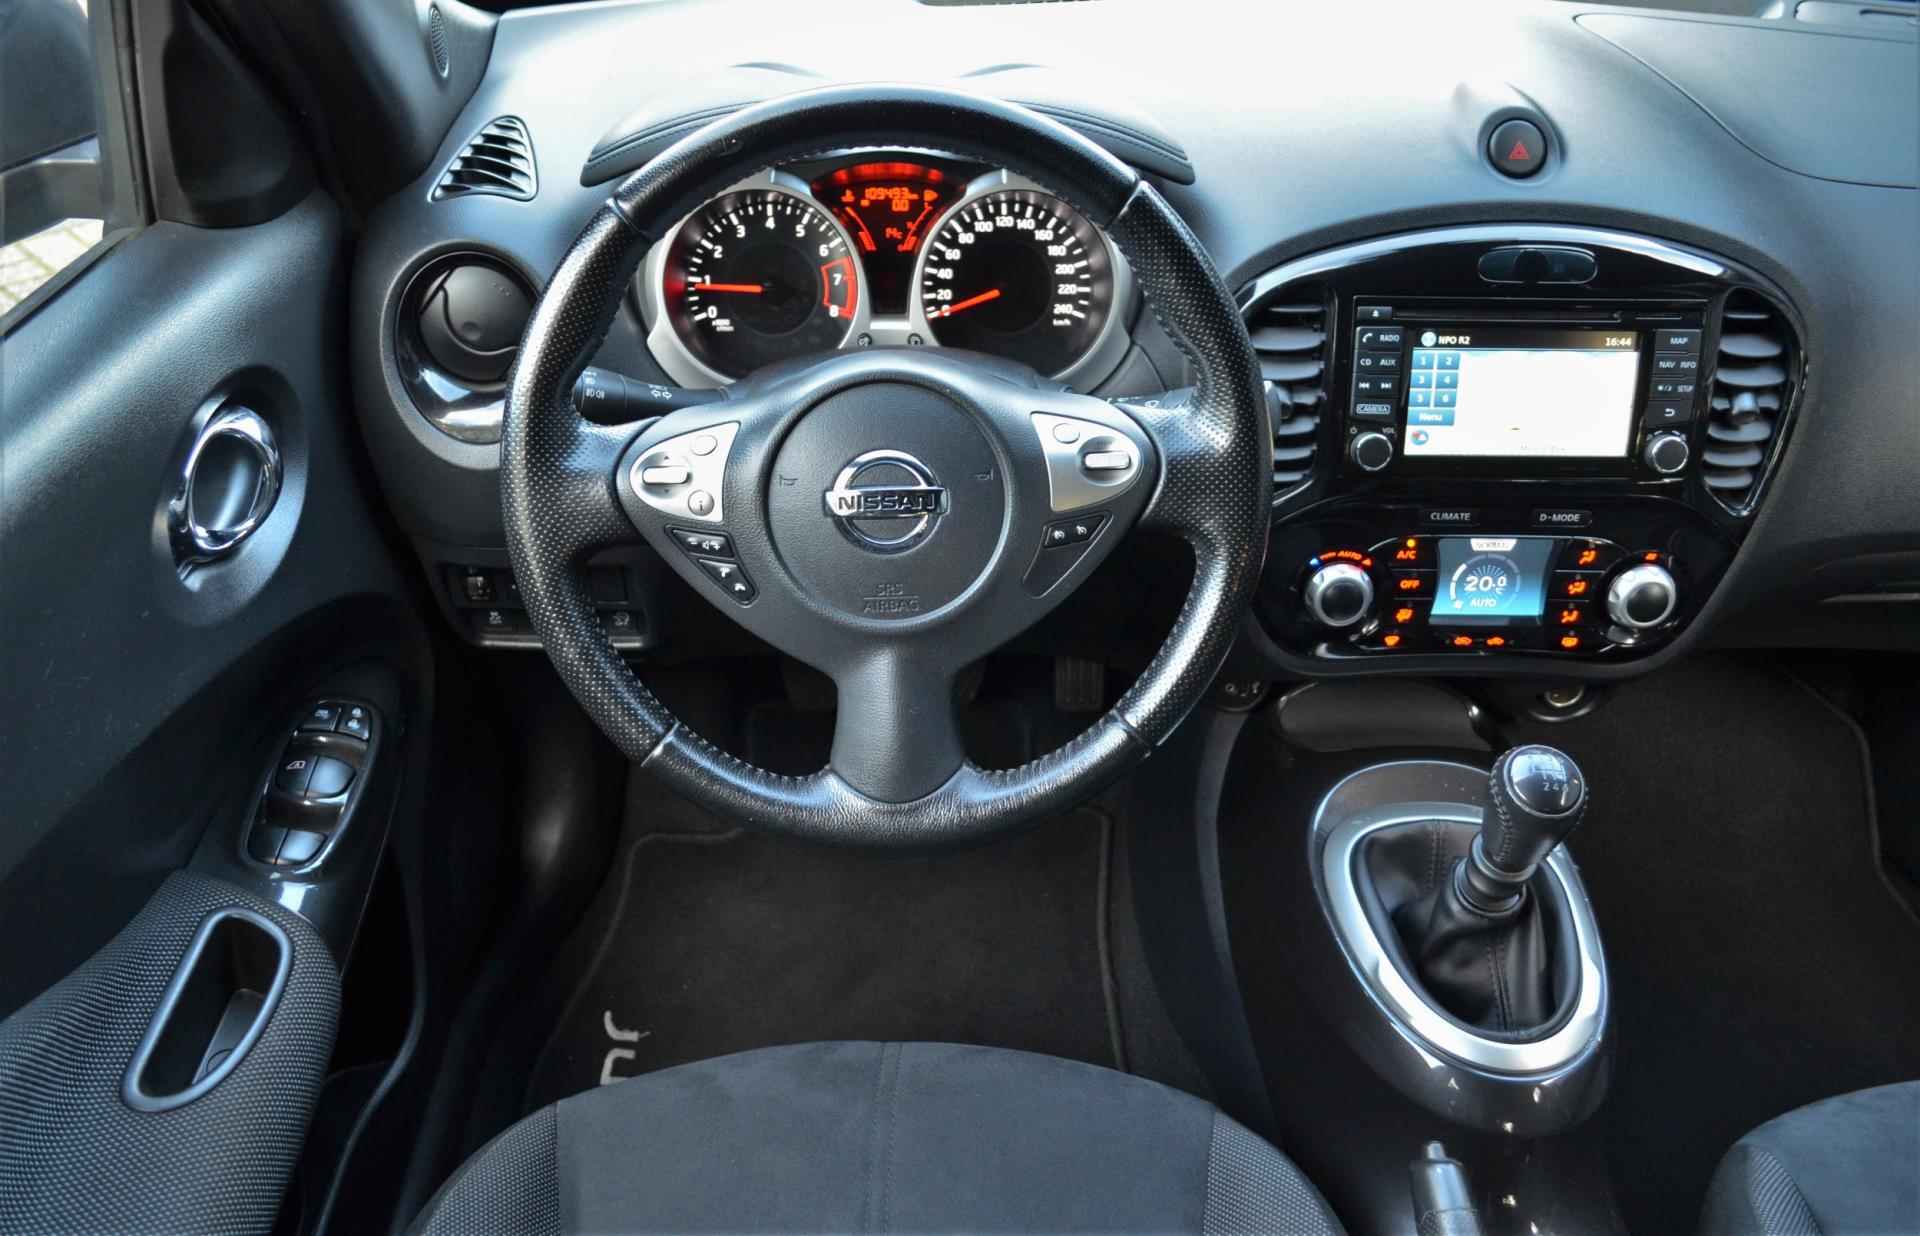 Nissan Juke 1.2 DIG-T S/S N-Connecta NL auto - 11/28